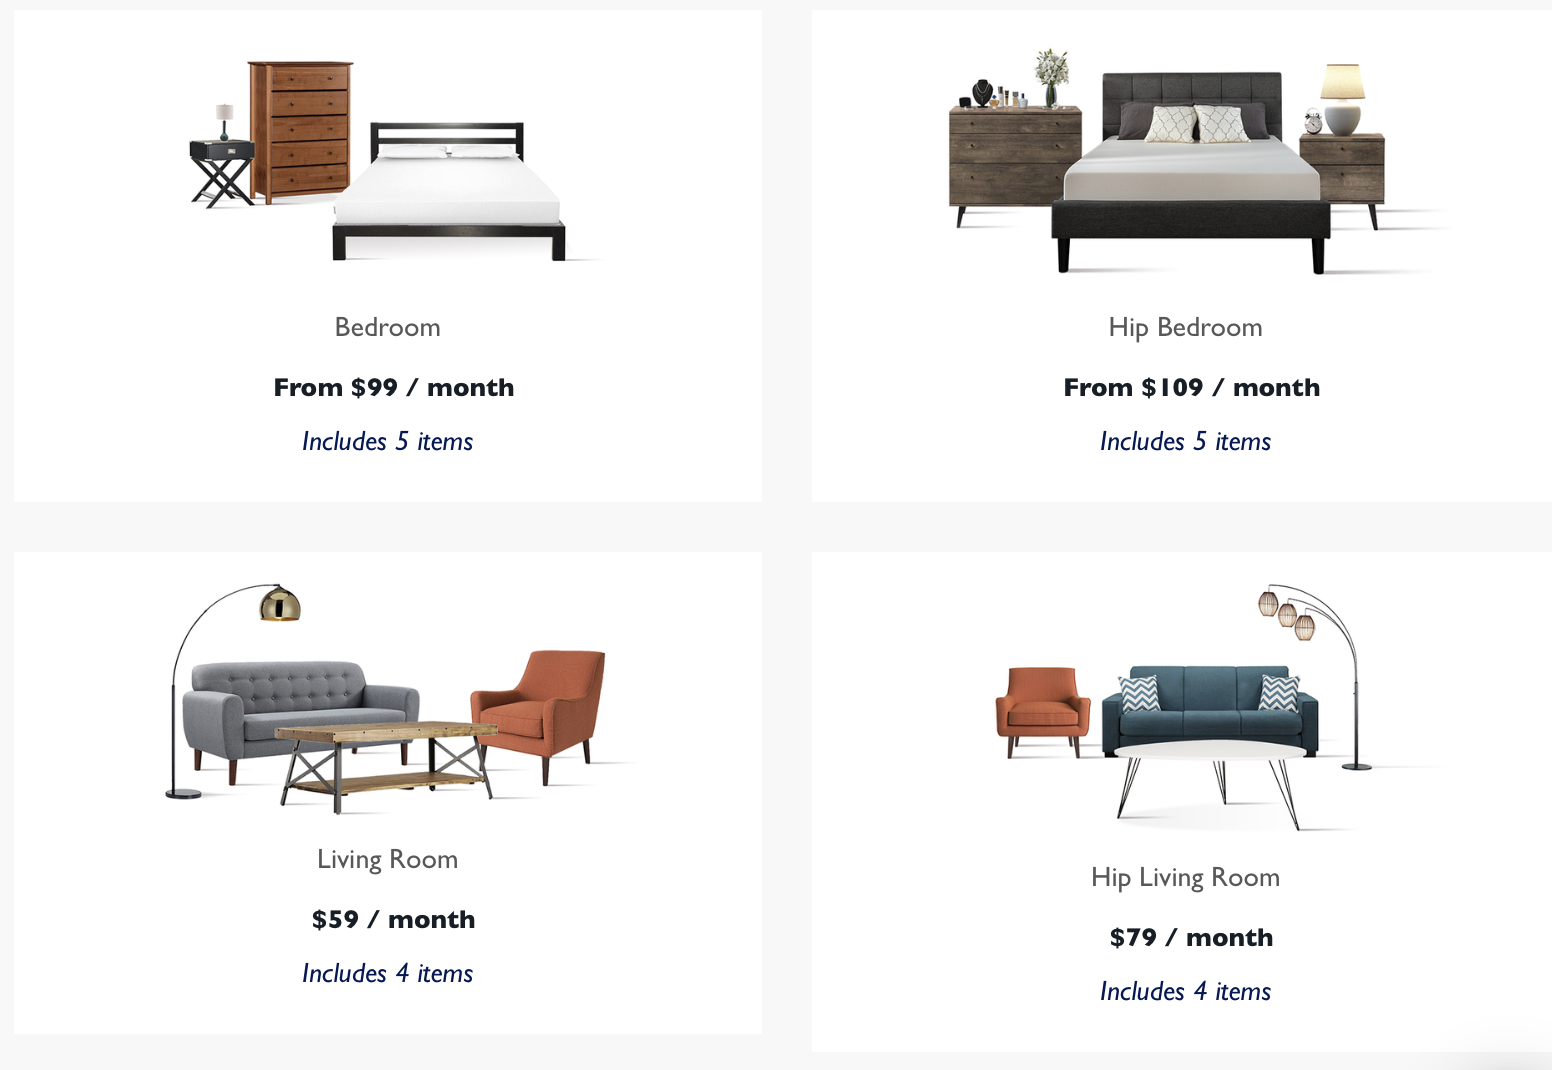 Feather raises $3.5M to rent furniture to millennials